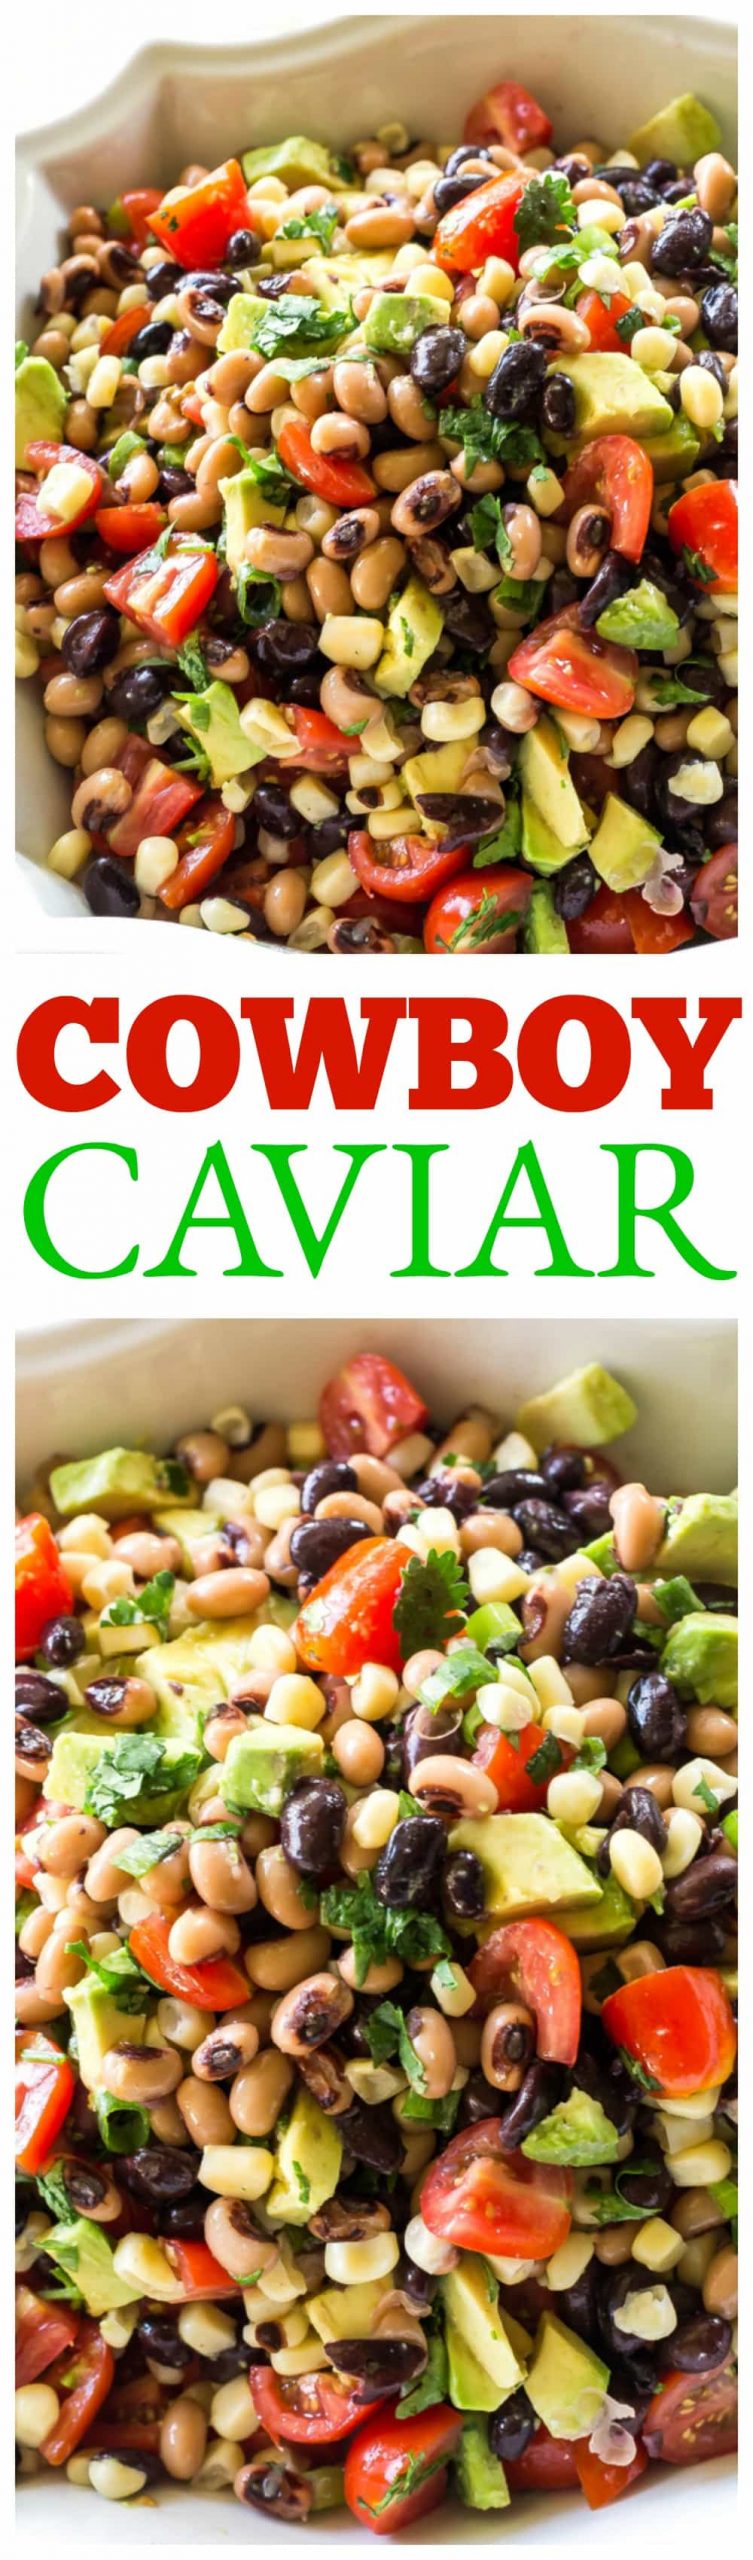 Cowboy Caviar is one of my favorite recipes to bring to a potluck or BBQ. Black beans, black eyed peas, avocado, tomatoes, and shoepeg corn tossed in a light zesty Italian dressing. Eat with chips or just a fork! #cowboy #caviar #potluck #side #bbq #salad